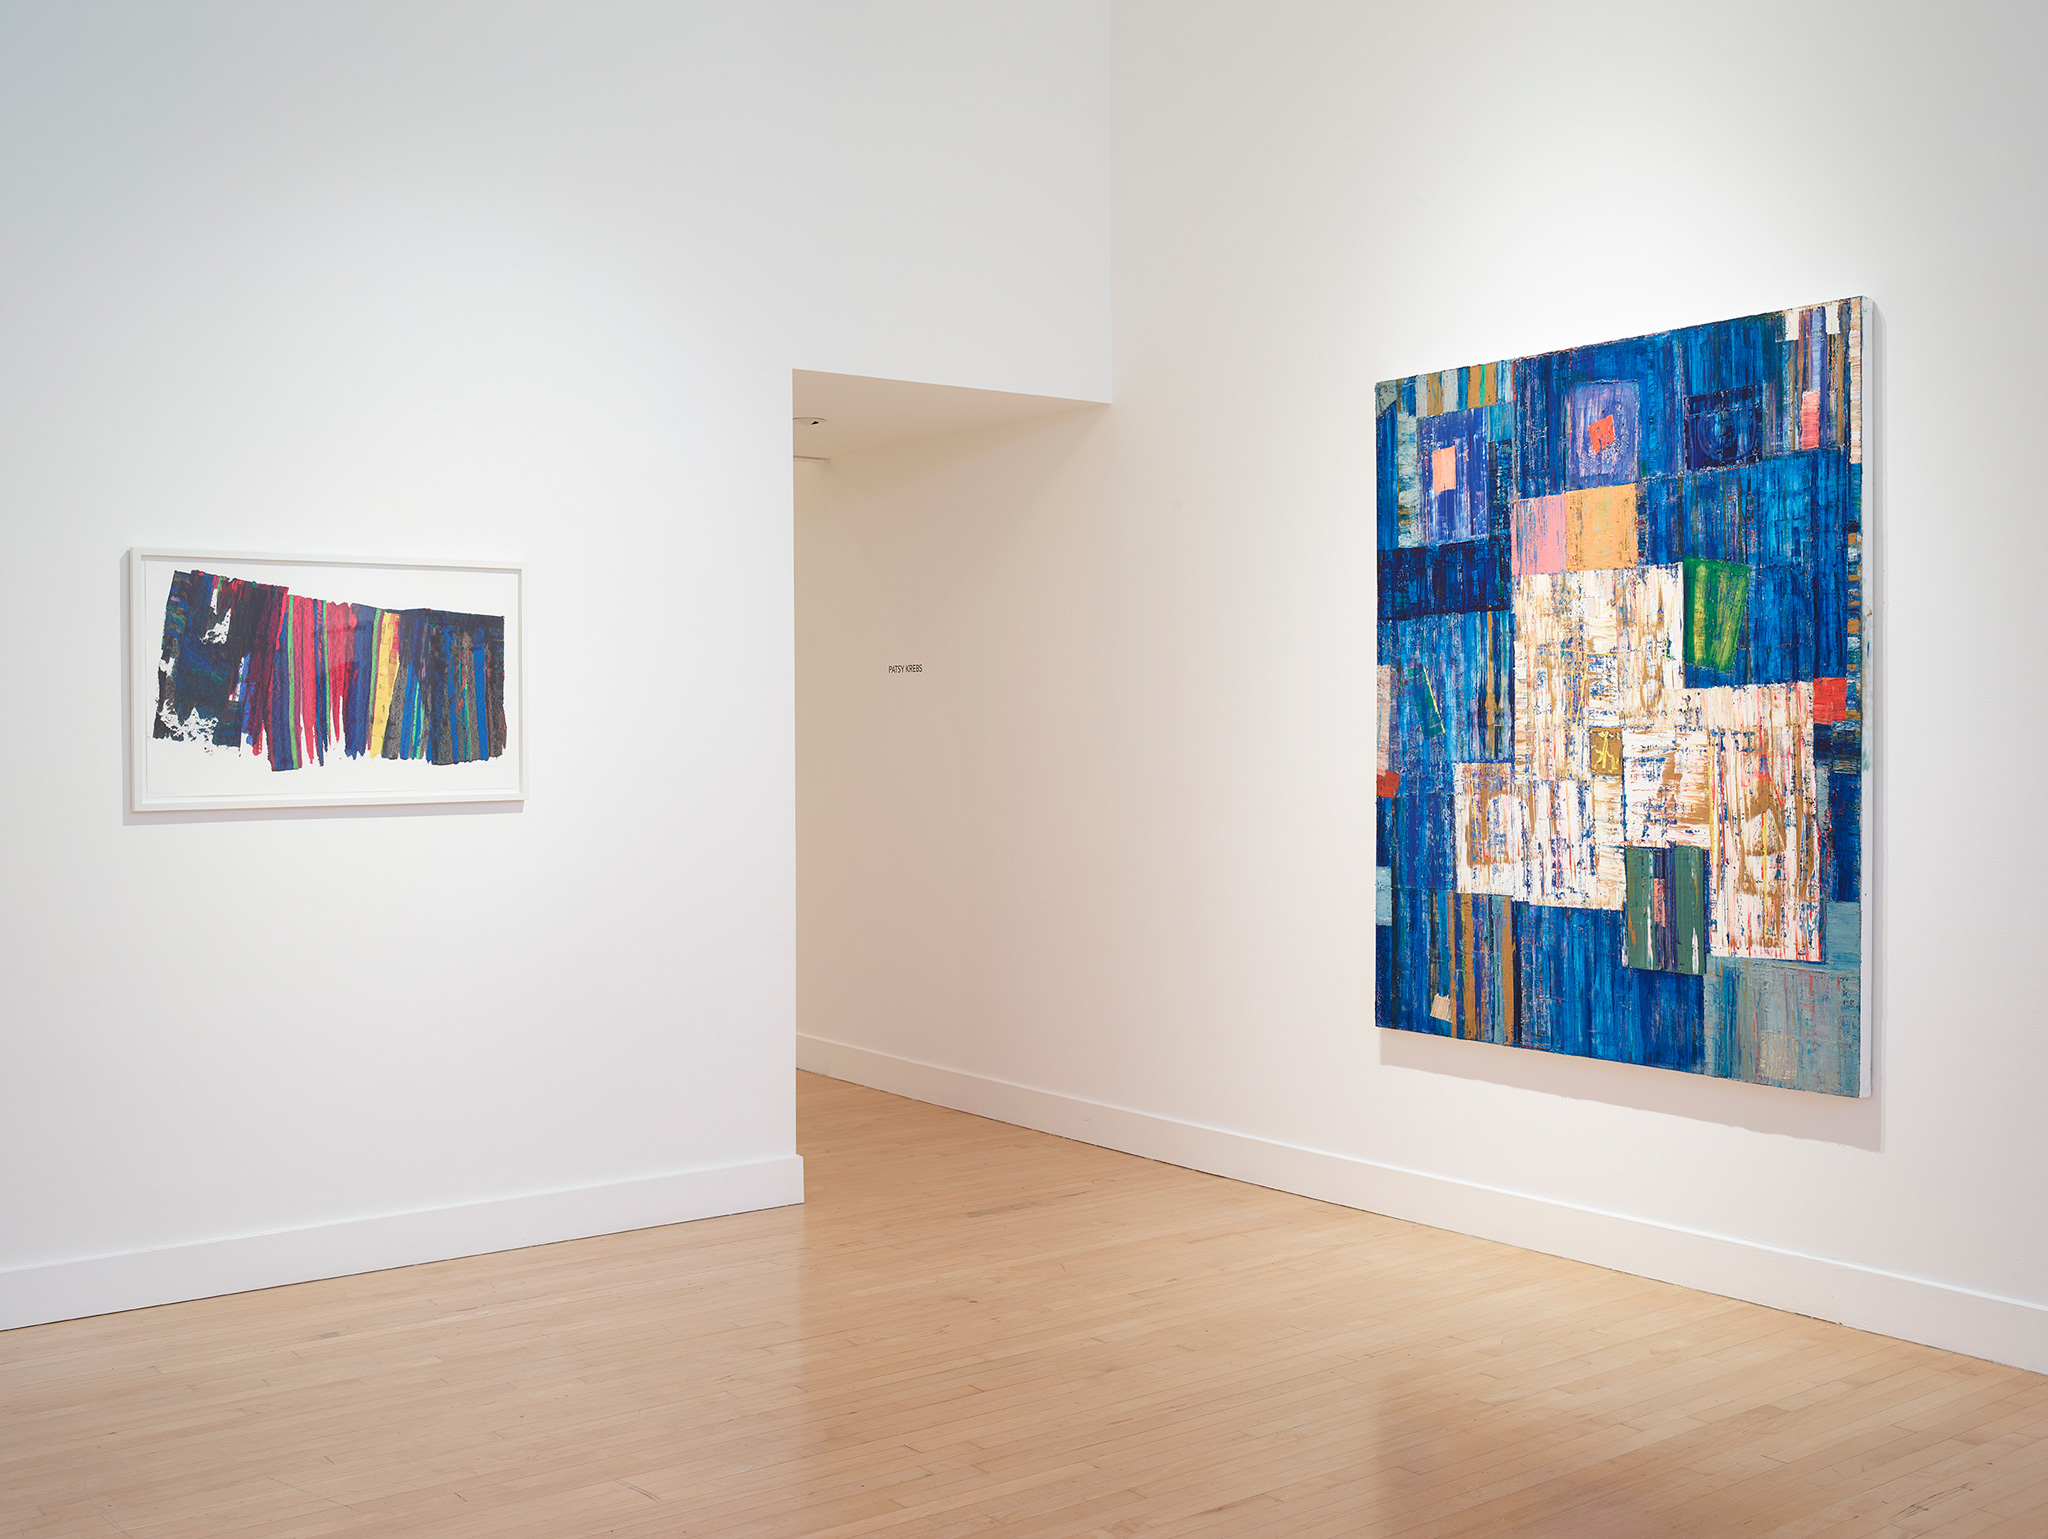  Installation view of Mike Henderson:&nbsp; Parallel Spaces , September 7 - October 28, 2017 at Haines Gallery 